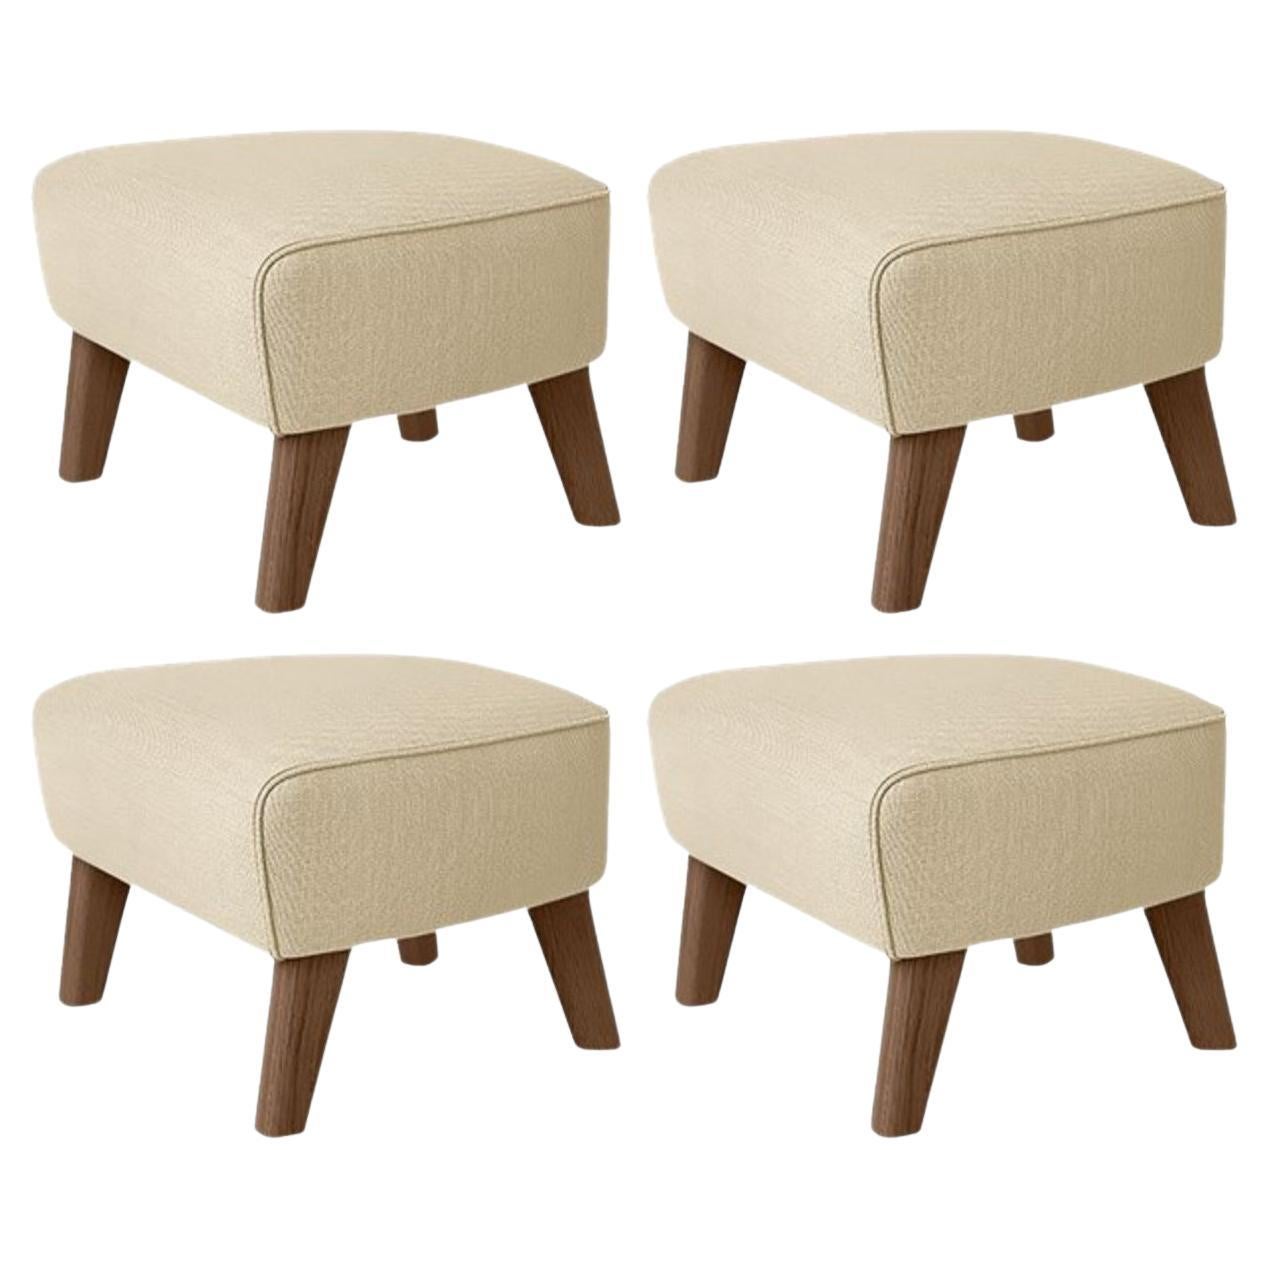 Set of 4 Sand and Smoked Oak Sahco Zero Footstool by Lassen For Sale